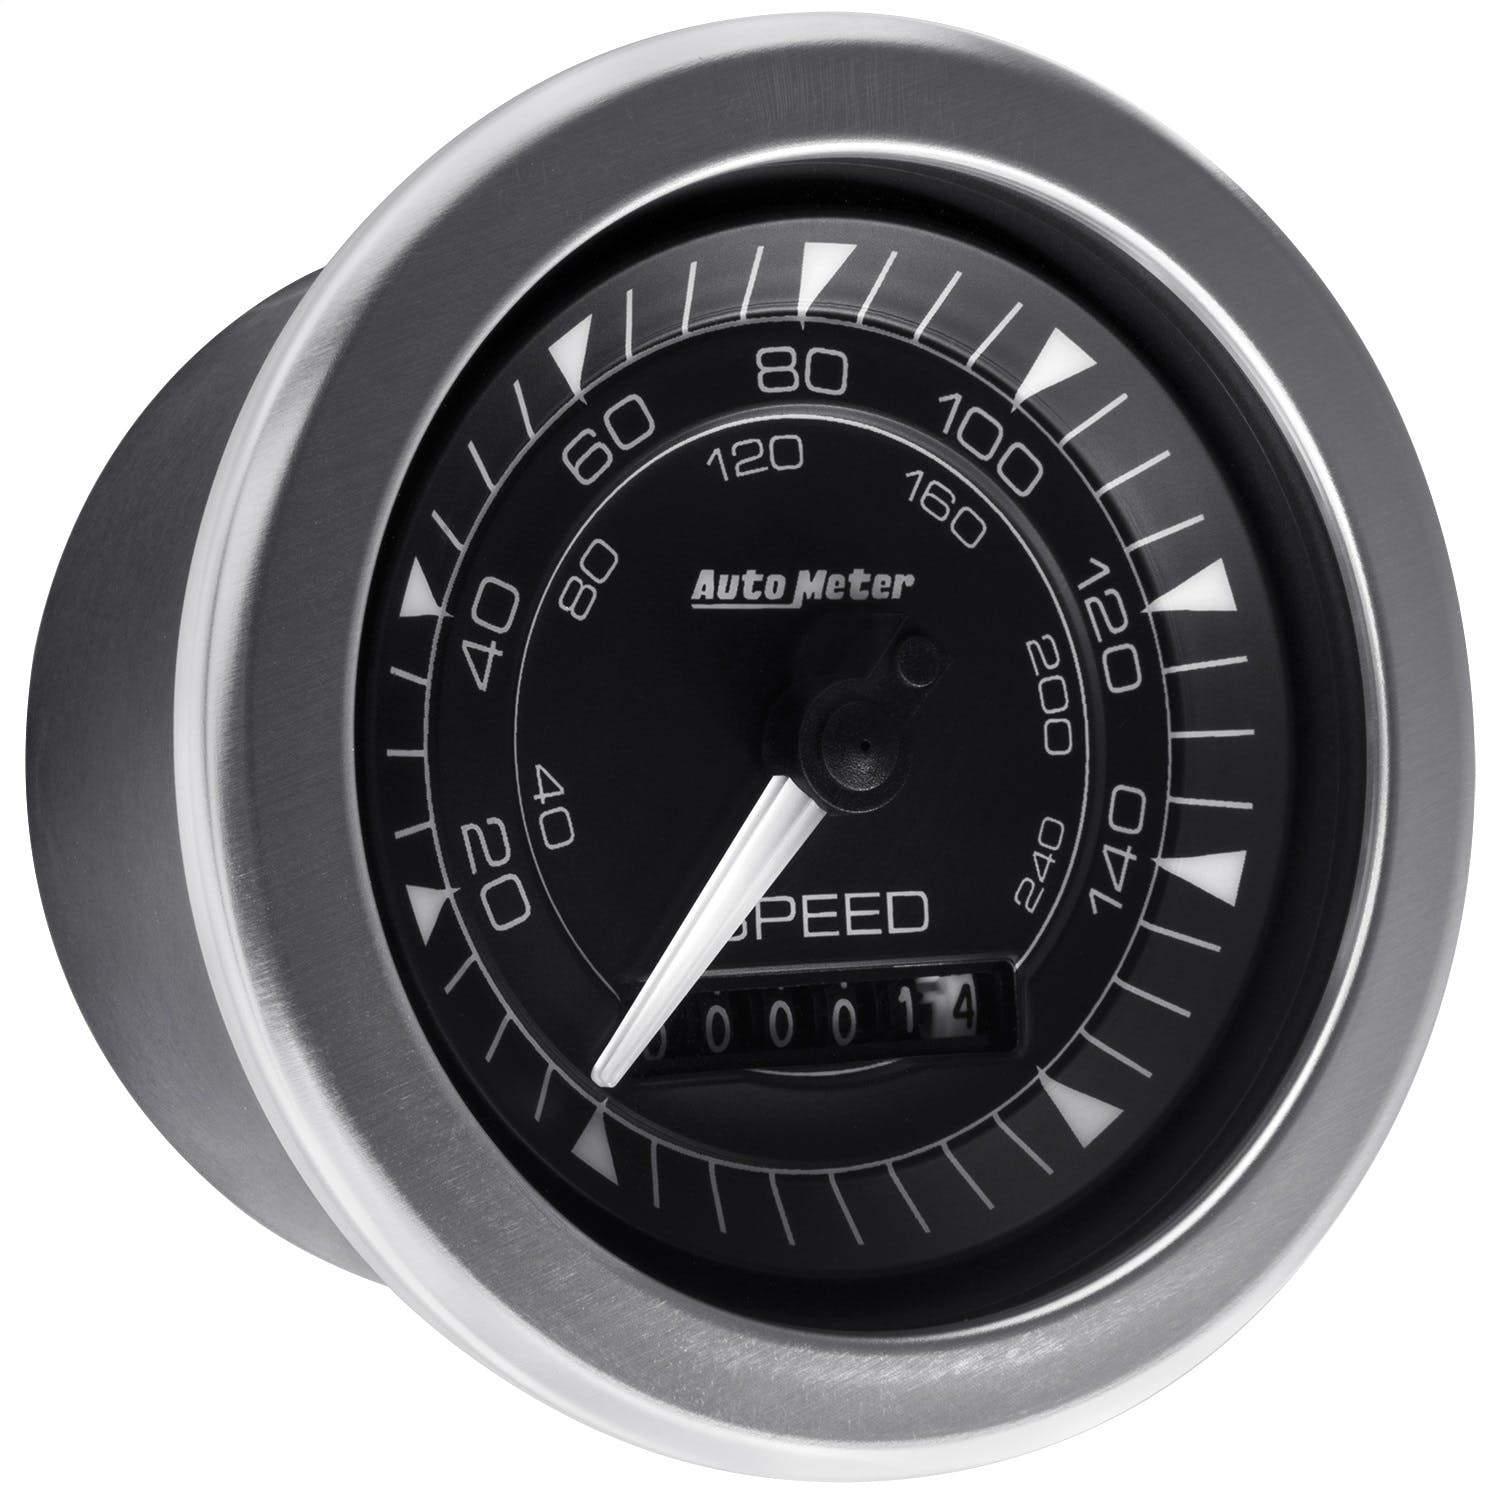 AutoMeter Products 8188 Chrono Gauge, Speedometer,160mph, Elec. Programmable